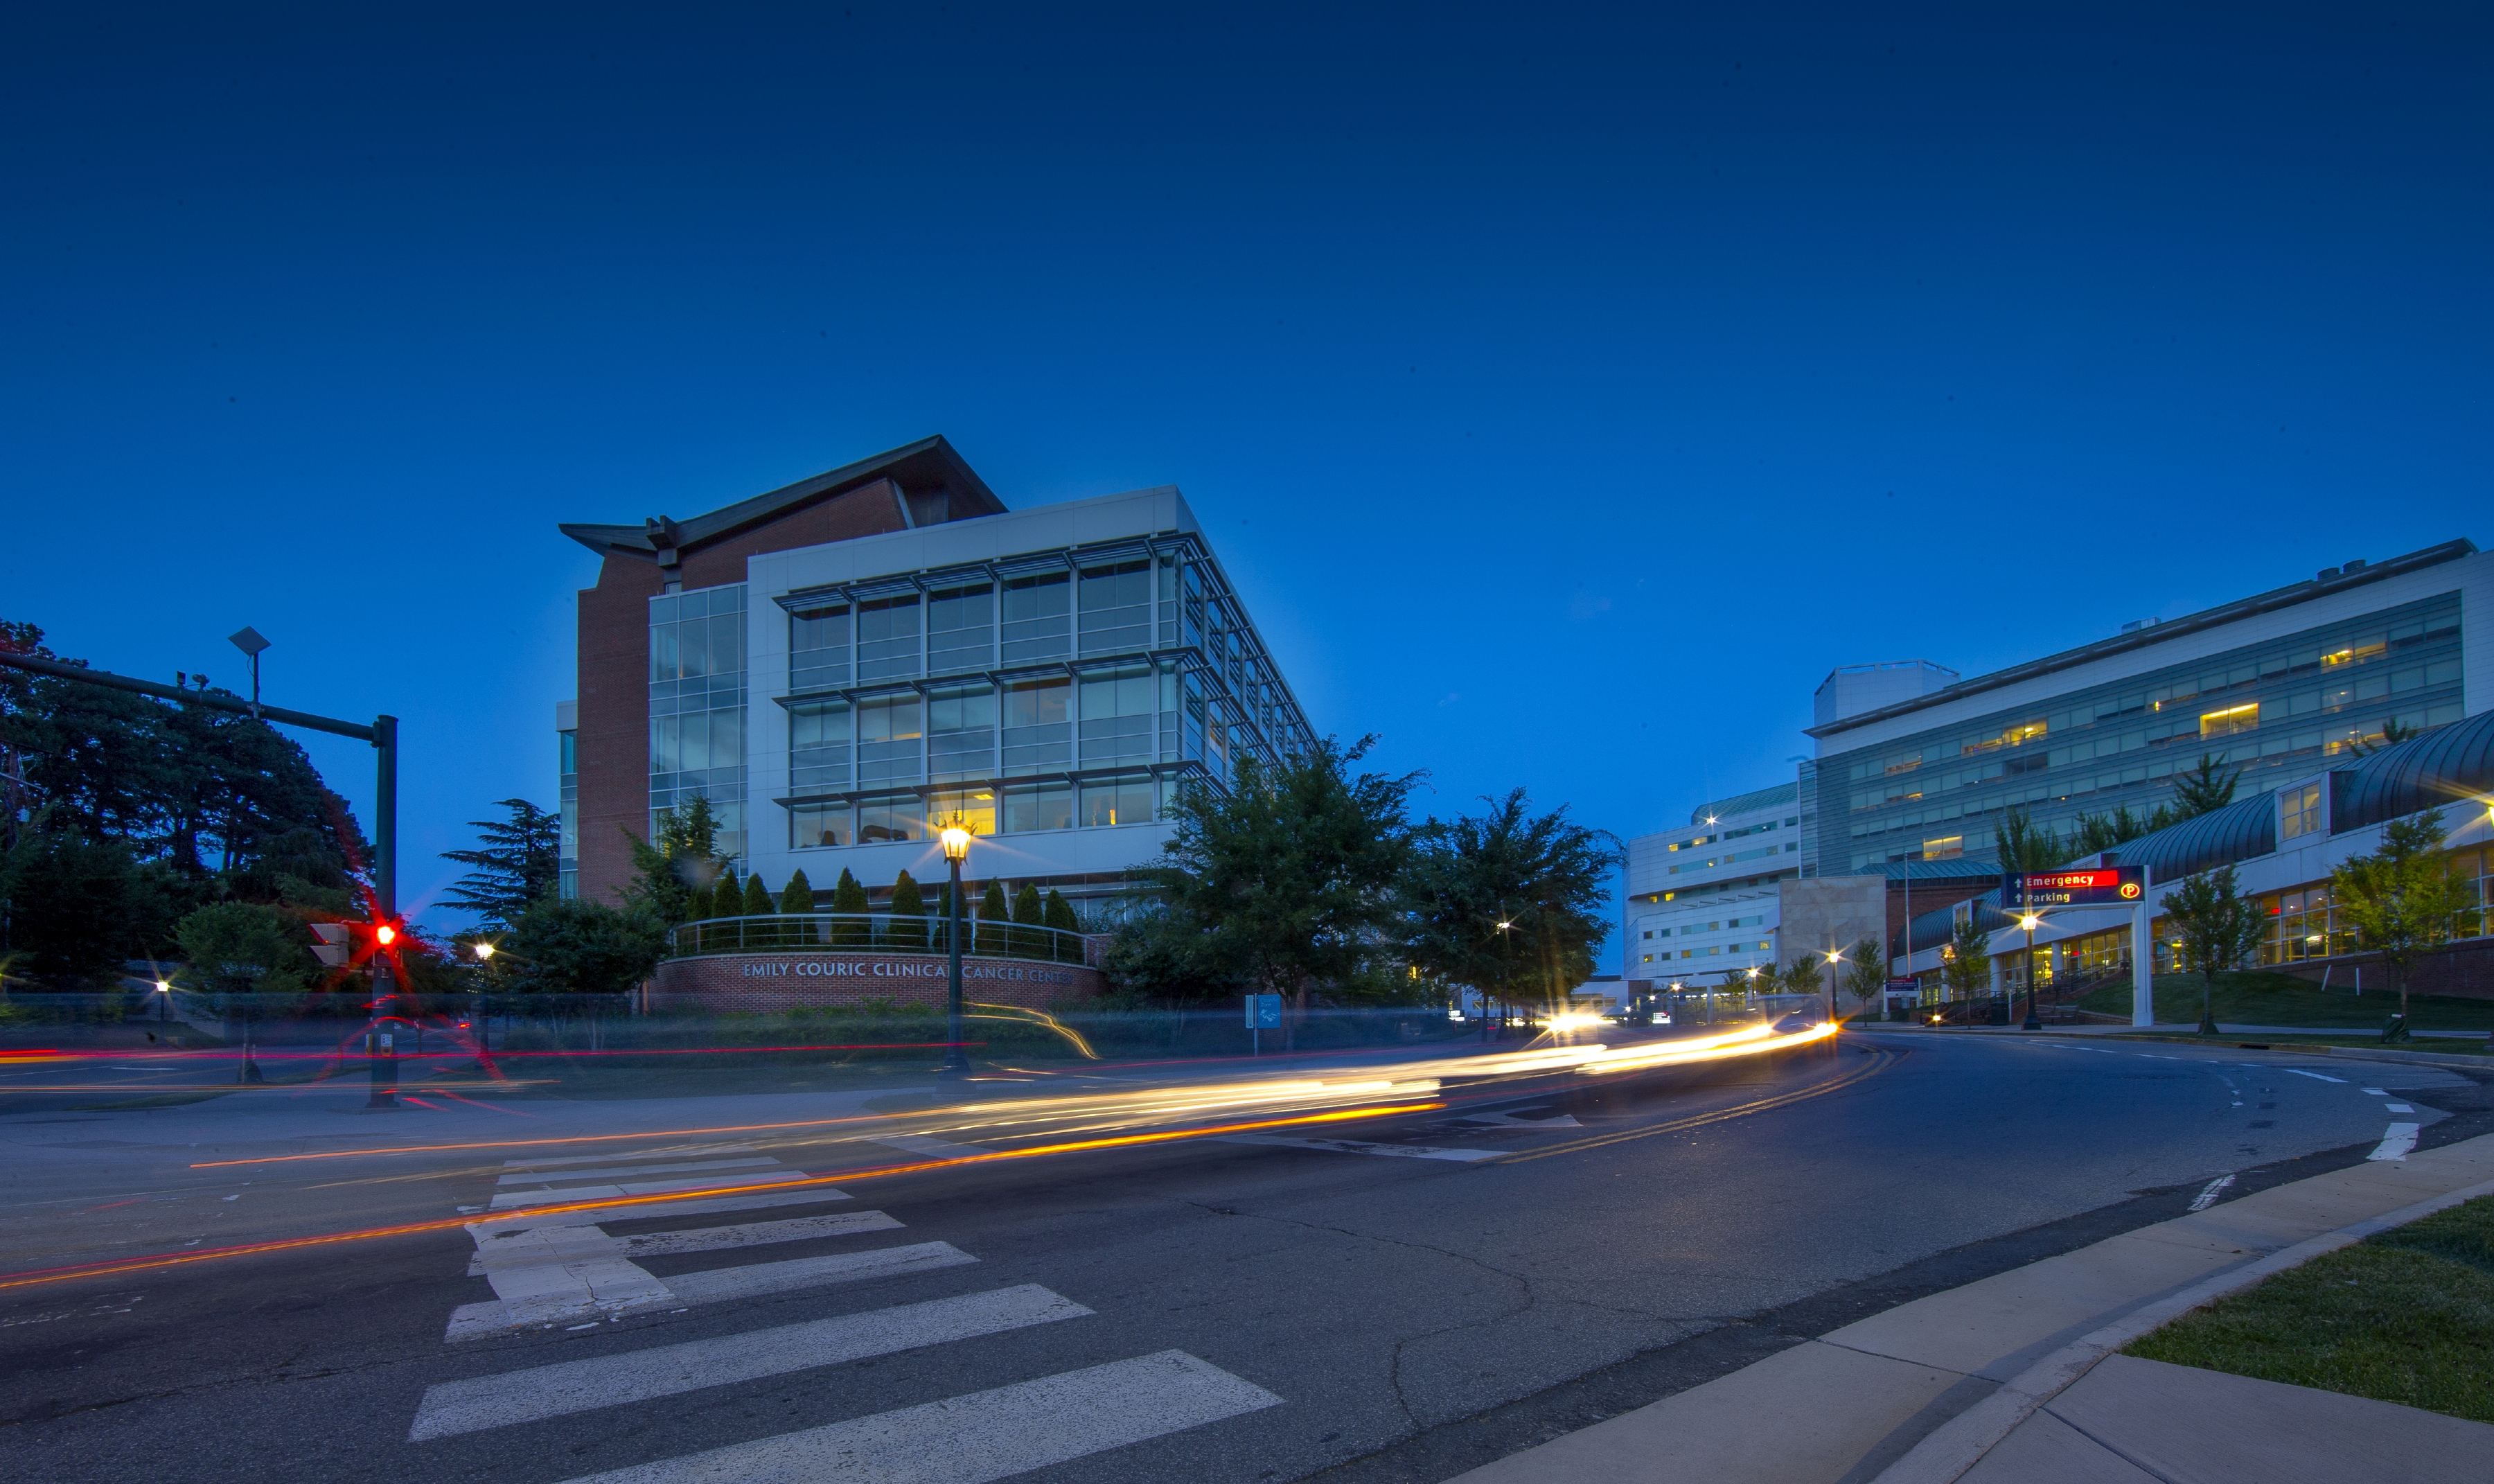 Emily Couric Cancer Center at night lit up